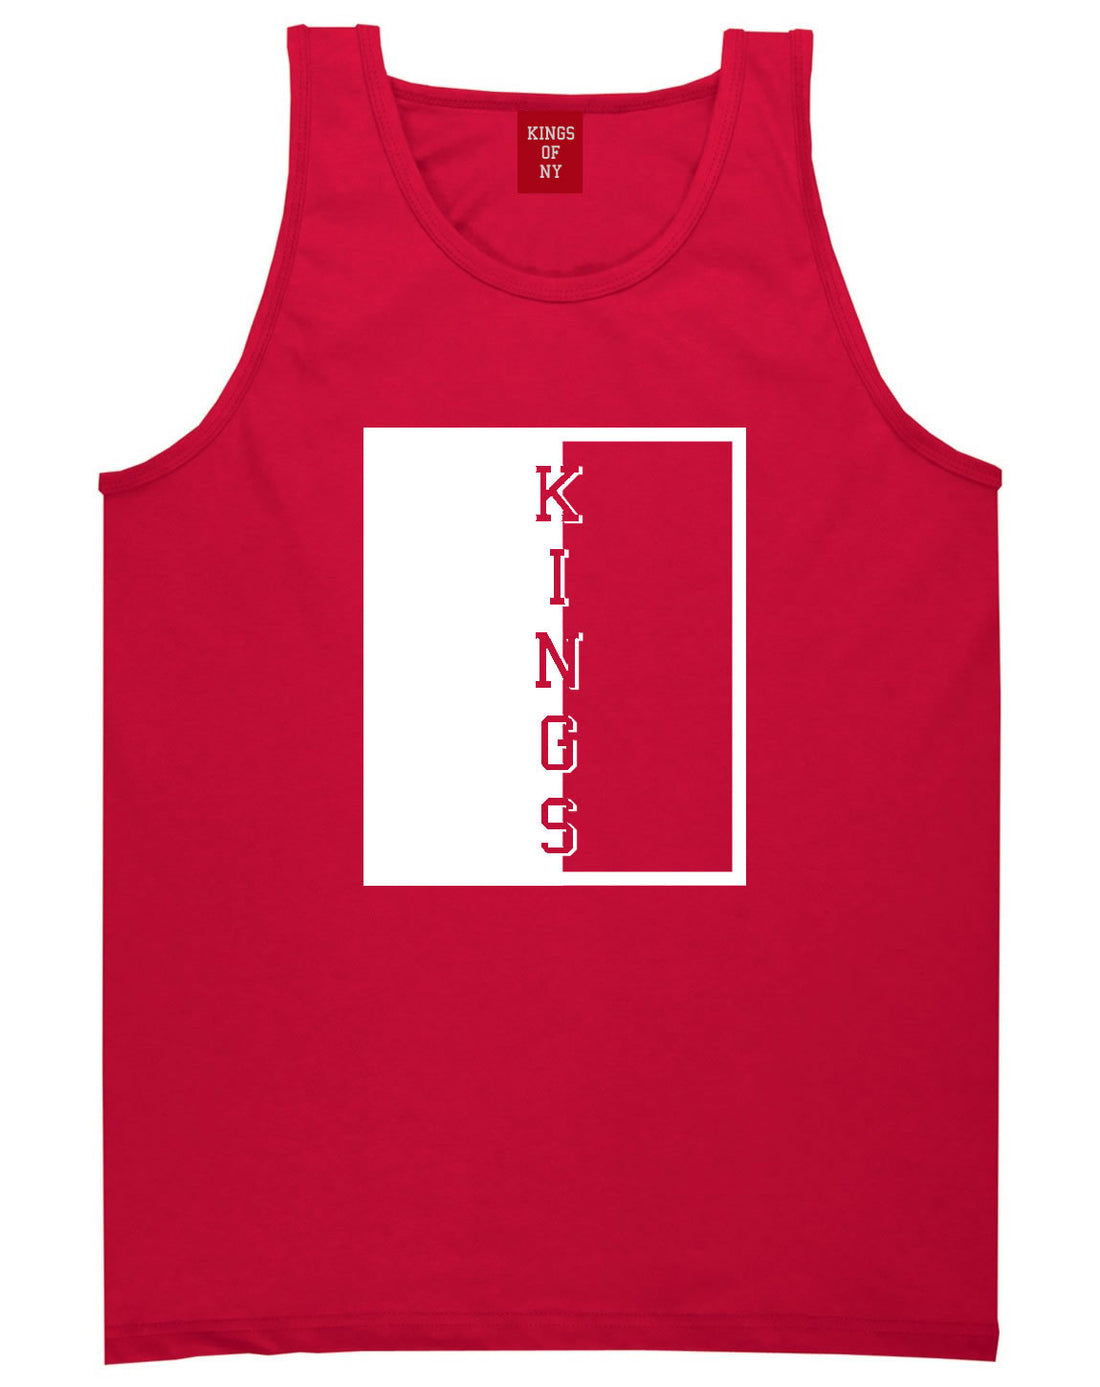 Scarface New York Tony Montana Tank Top in Red by Kings Of NY